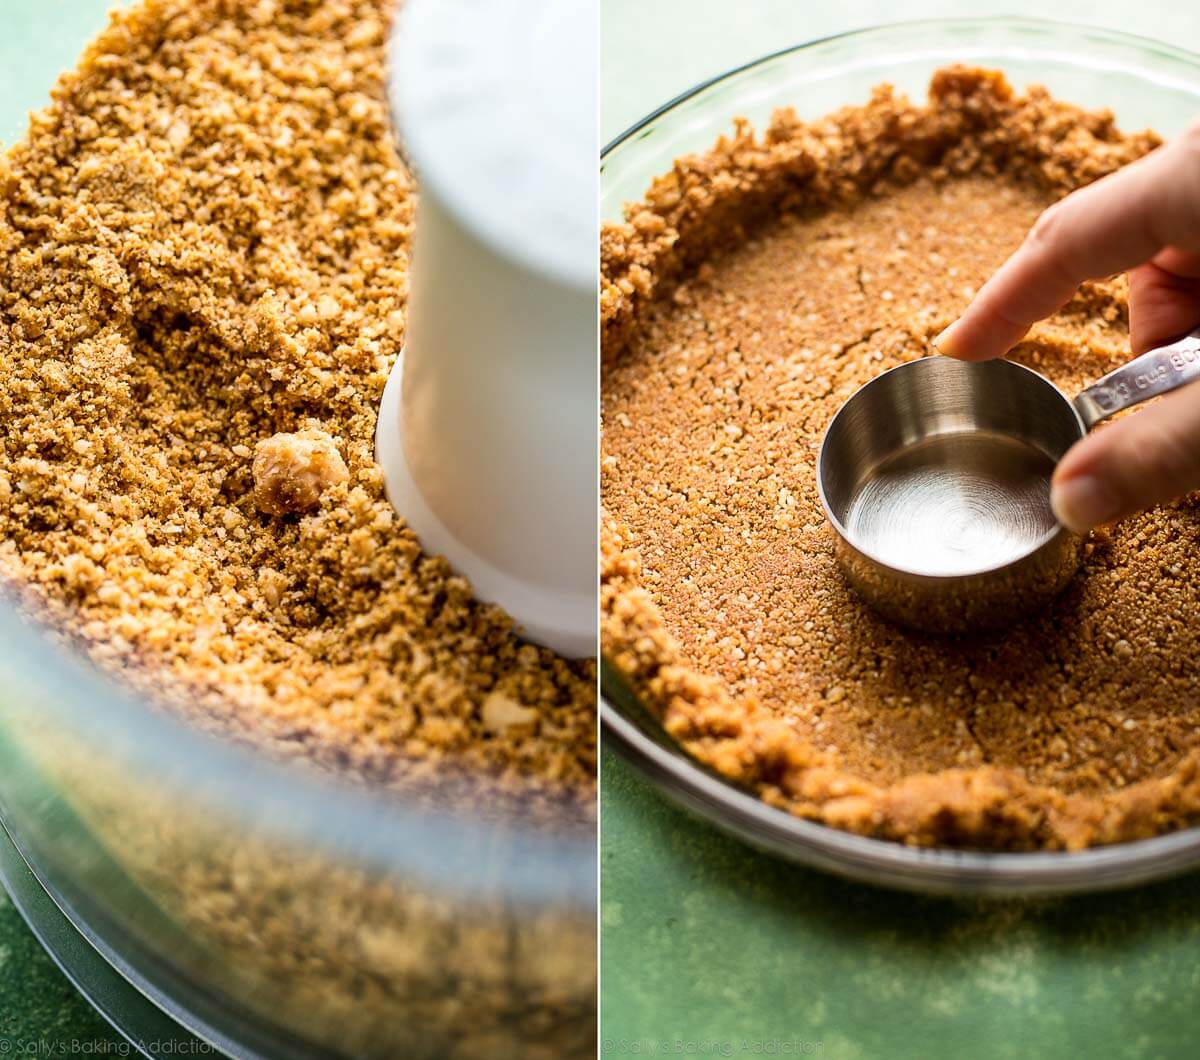 2 images of graham cracker crust crumbs in a food processor and pressing the crust into a glass pie dish with a measuring cup